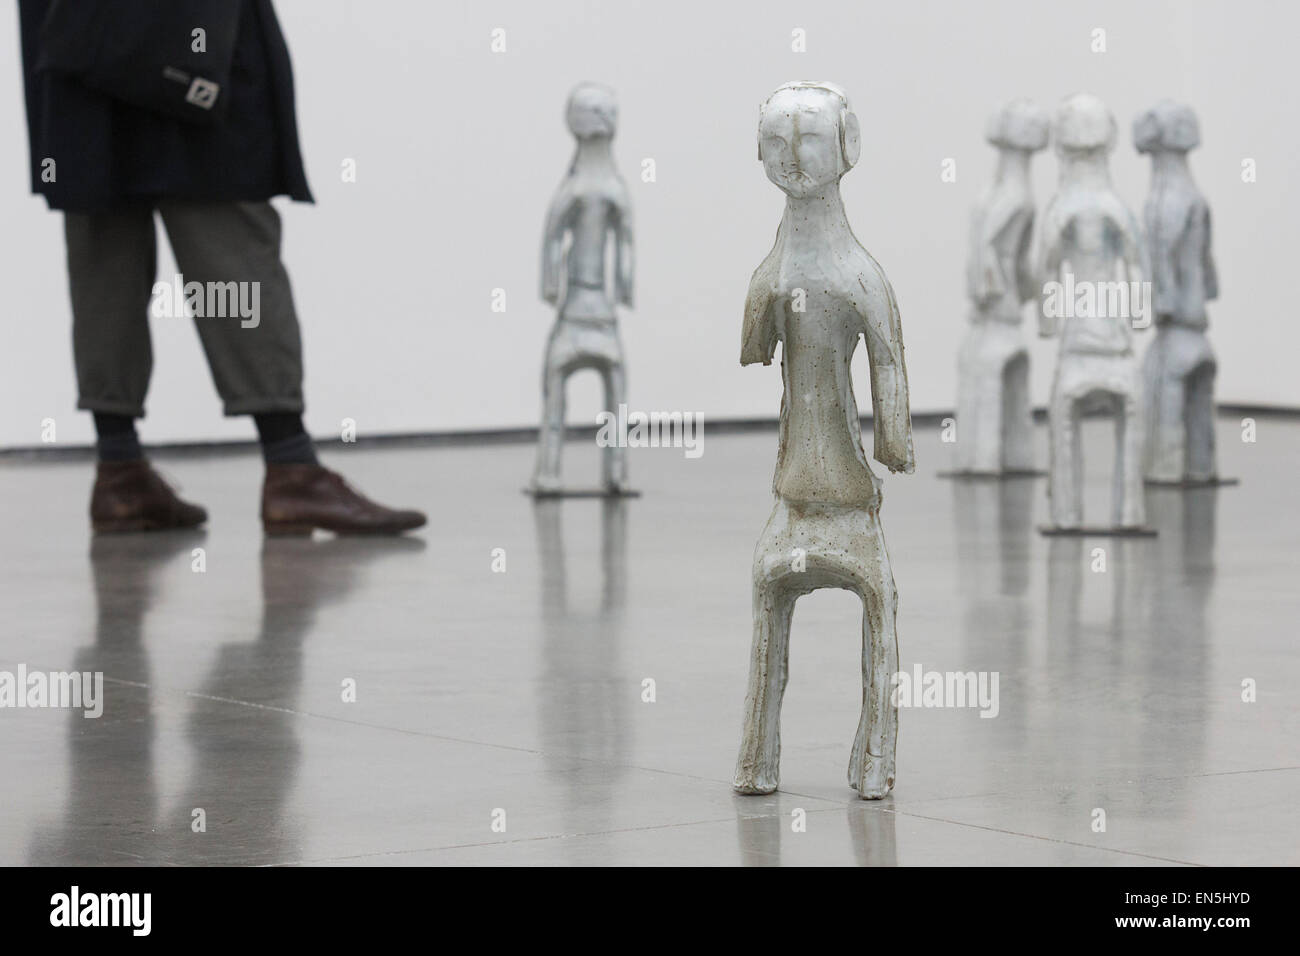 London, UK. 28 April 2015. Pictured: Knockoff (2015) sculptures. The exhibition 'Freedom of Assembly', new work by American artist Theaster Gates opens at the White Cube gallery in Bermondsey, London. The artworks are on display from 29 April to 5 July 2015. Stock Photo